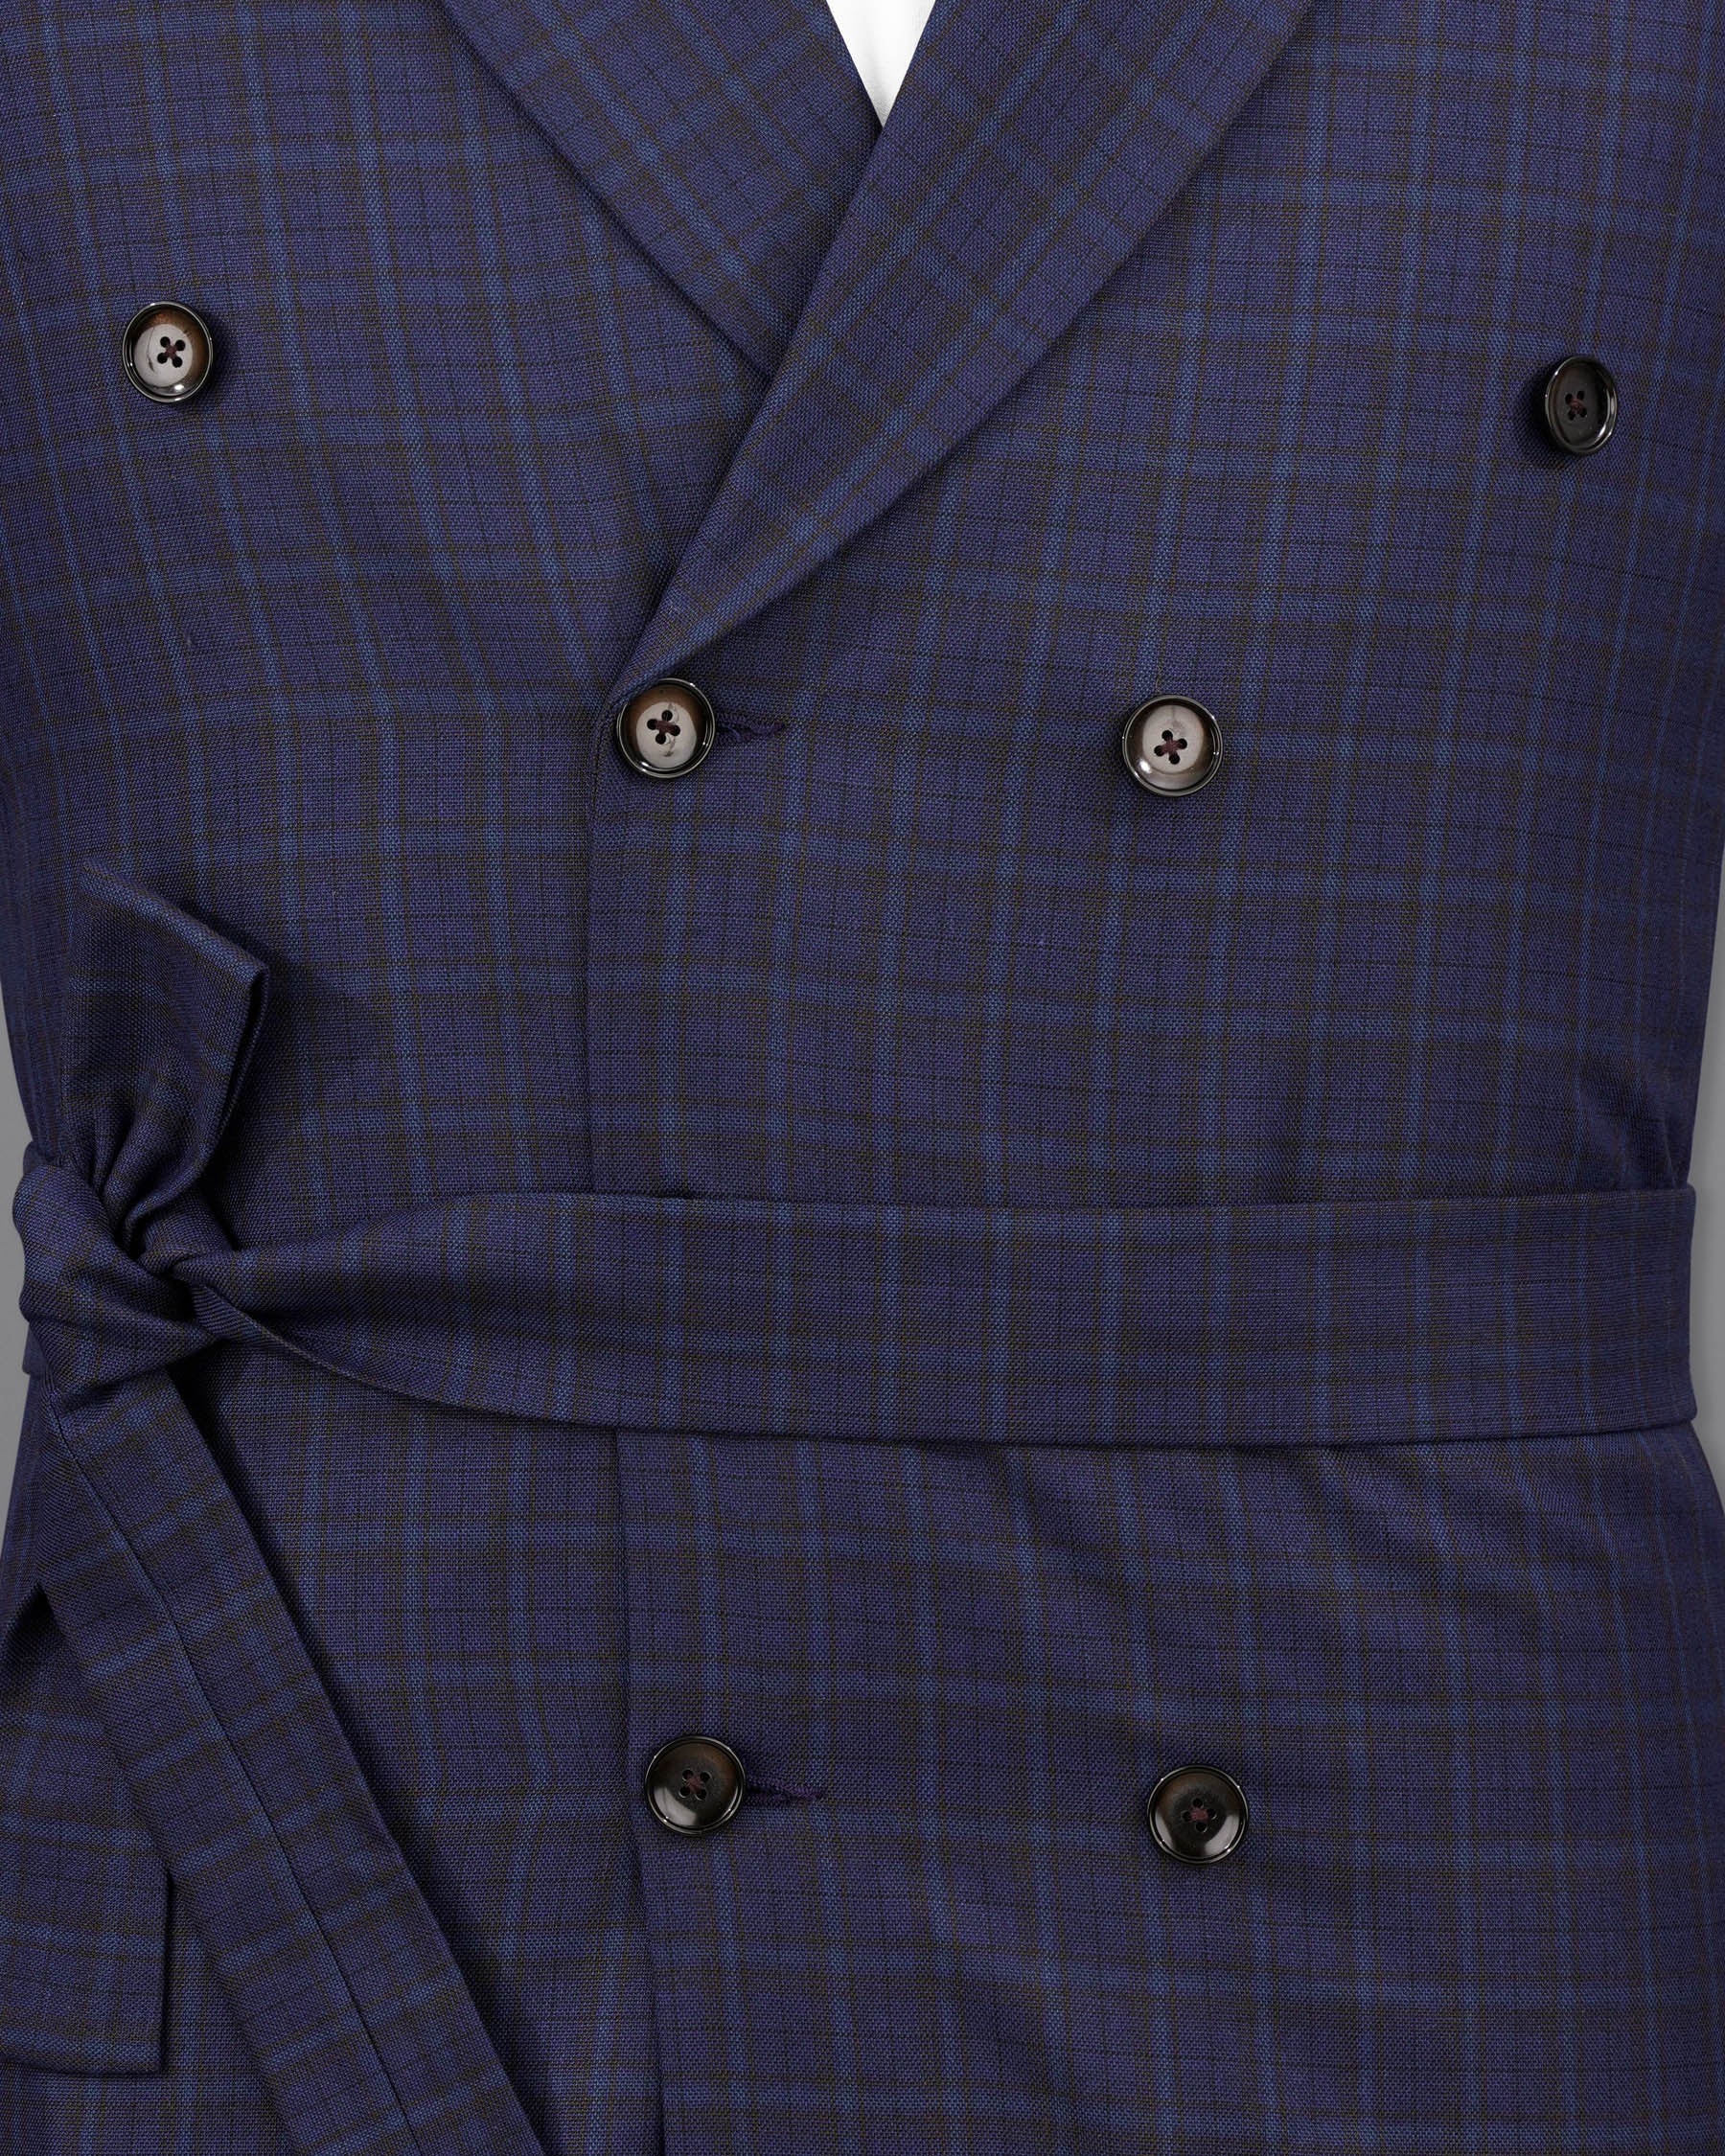 Martinique blue Subtle Checkered Double Breasted with Belt Closure Designer Trench Coat with Pant TCPT2112-DB-D35-36, TCPT2112-DB-D35-38, TCPT2112-DB-D35-40, TCPT2112-DB-D35-42, TCPT2112-DB-D35-44, TCPT2112-DB-D35-46, TCPT2112-DB-D35-48, TCPT2112-DB-D35-50, TCPT2112-DB-D35-52, TCPT2112-DB-D35-54, TCPT2112-DB-D35-56, TCPT2112-DB-D35-58, TCPT2112-DB-D35-60